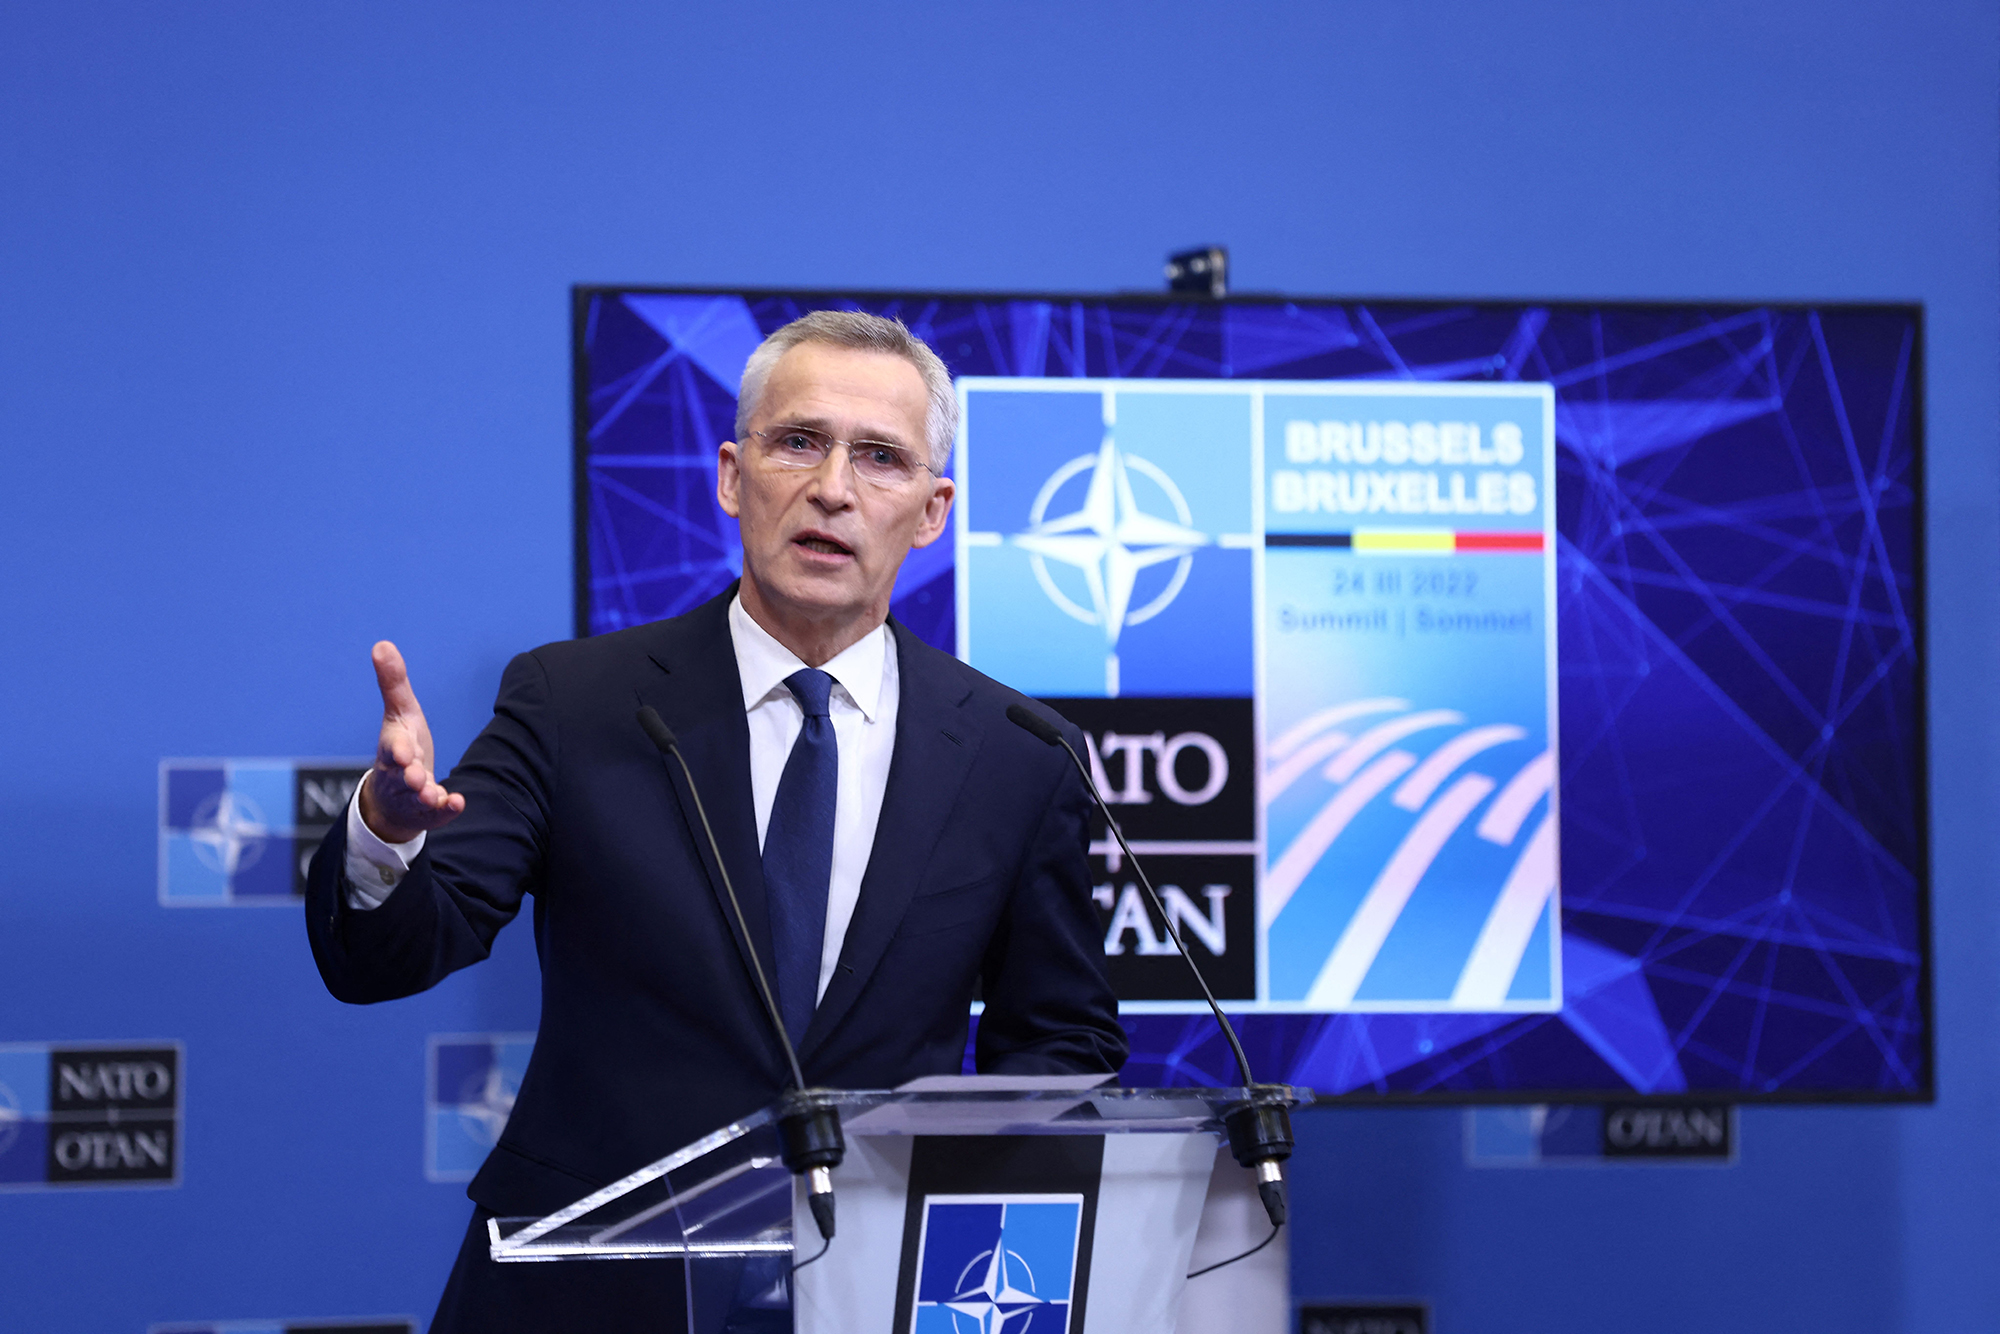 NATO Secretary General Jens Stoltenberg addresses a press conference at NATO Headquarters in Brussels, Belgium, on March 24.